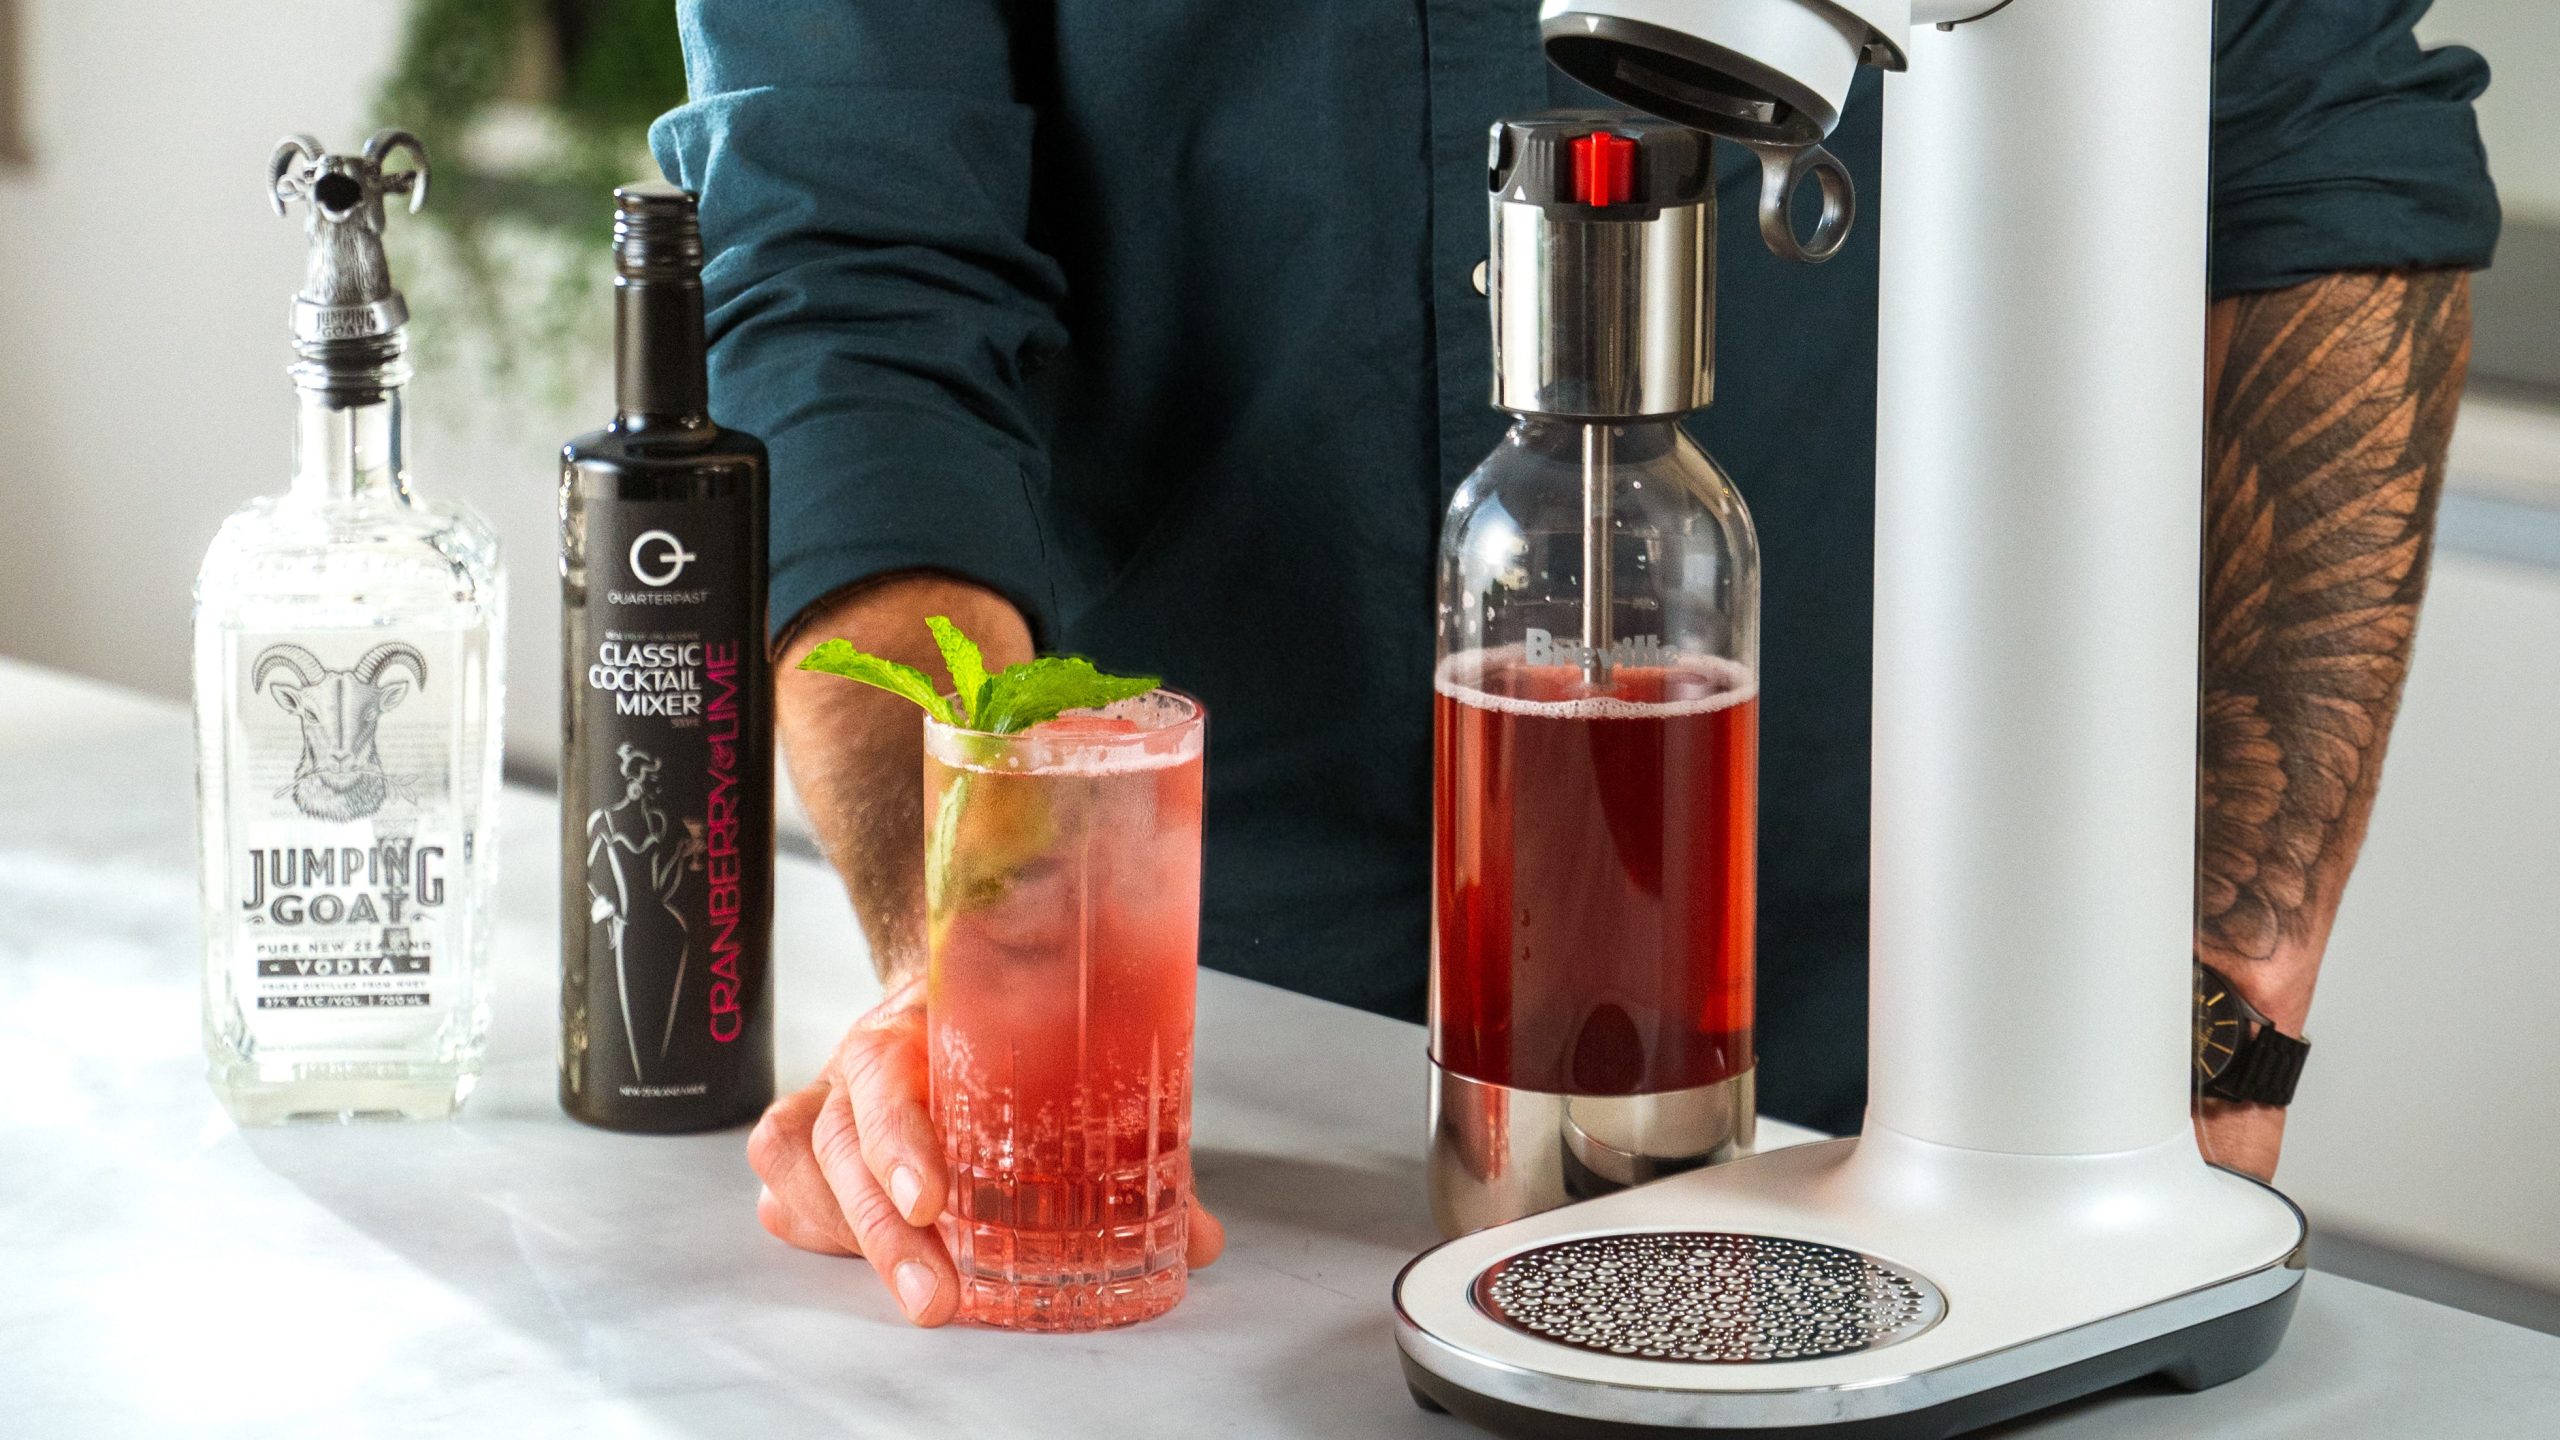 Cranberry & lime fizz with Breville InFizz, Jumping Goat vodka and QuarterPast Cranberry & Lime syrup